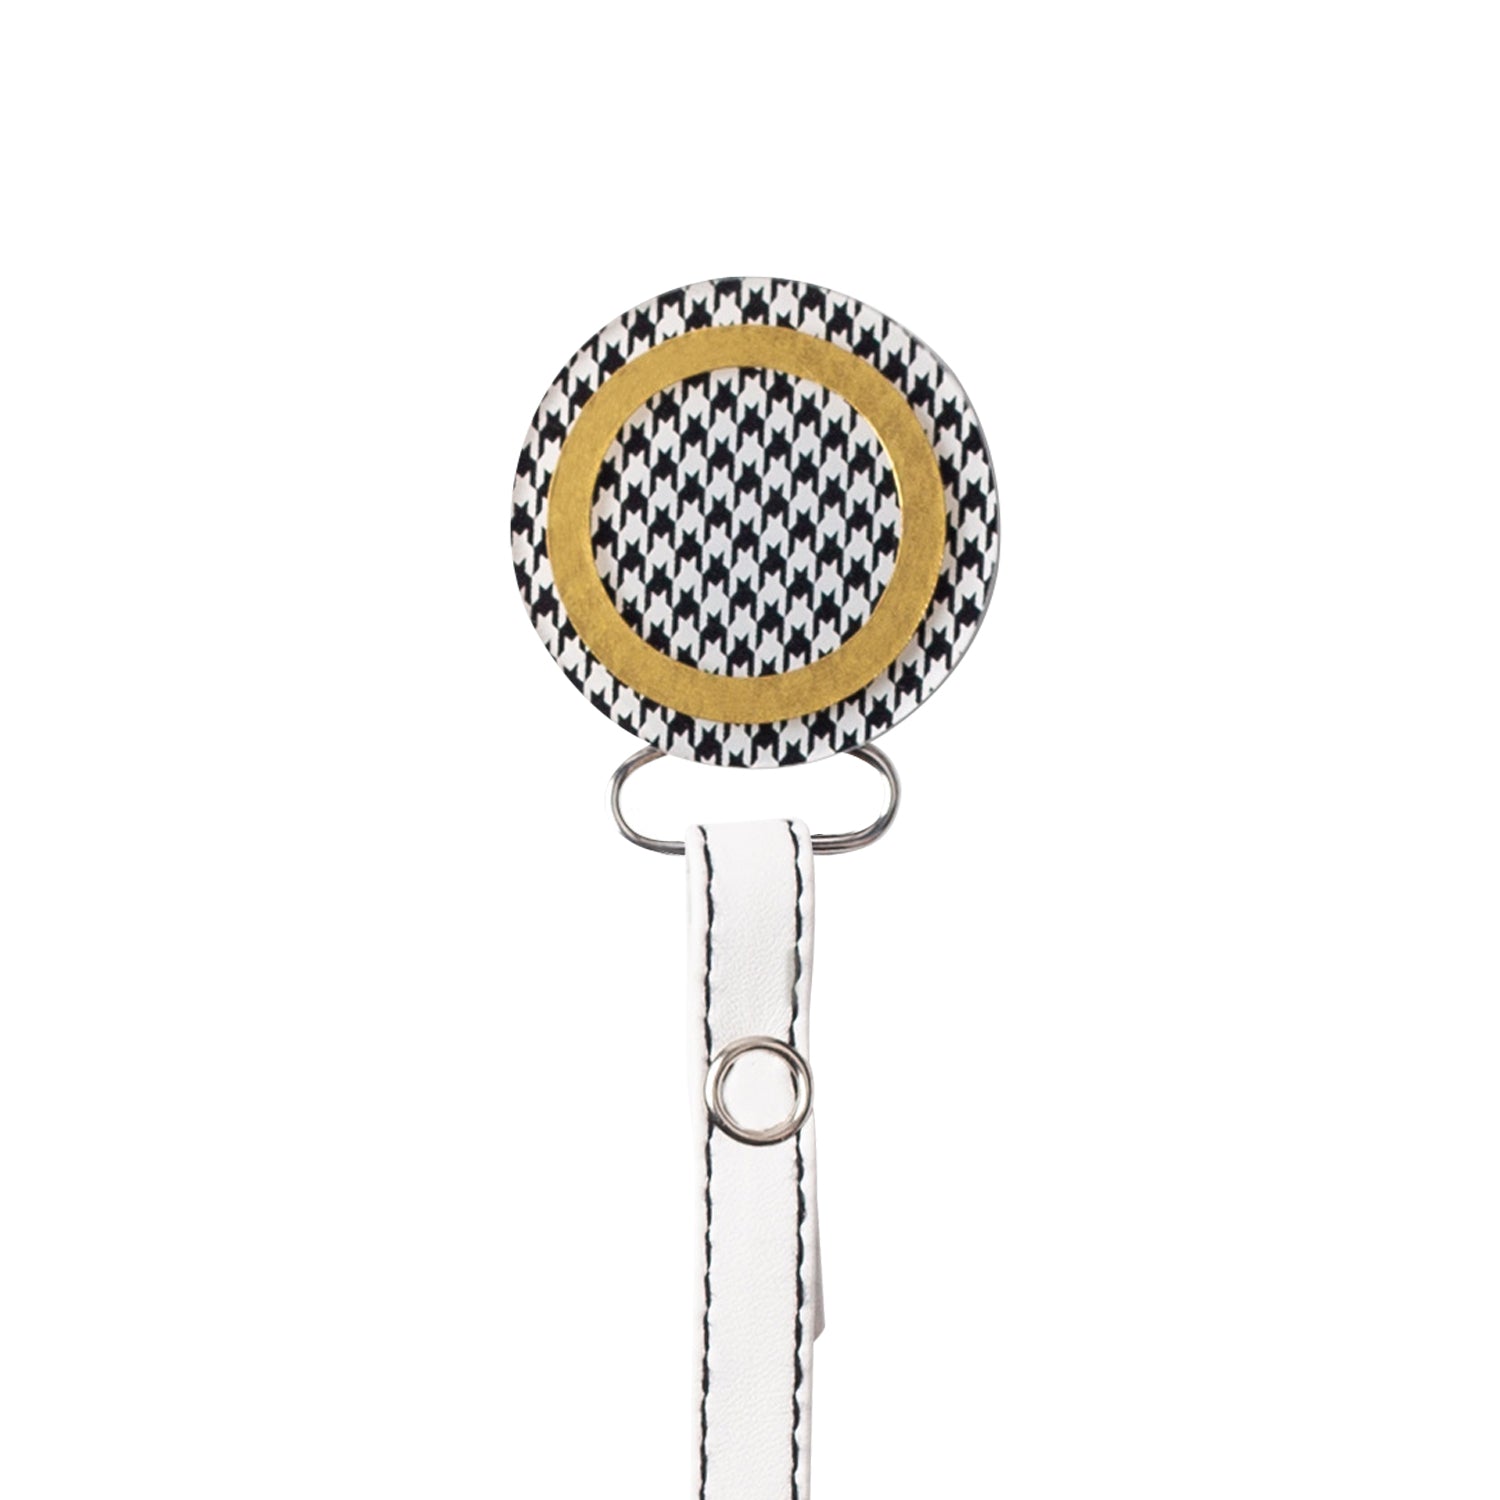 Classy Paci Houndstooth Black White Check Circle with Gold, white, grey, gold, baby boy girl pacifier clip Bibs Friggs Gift Set